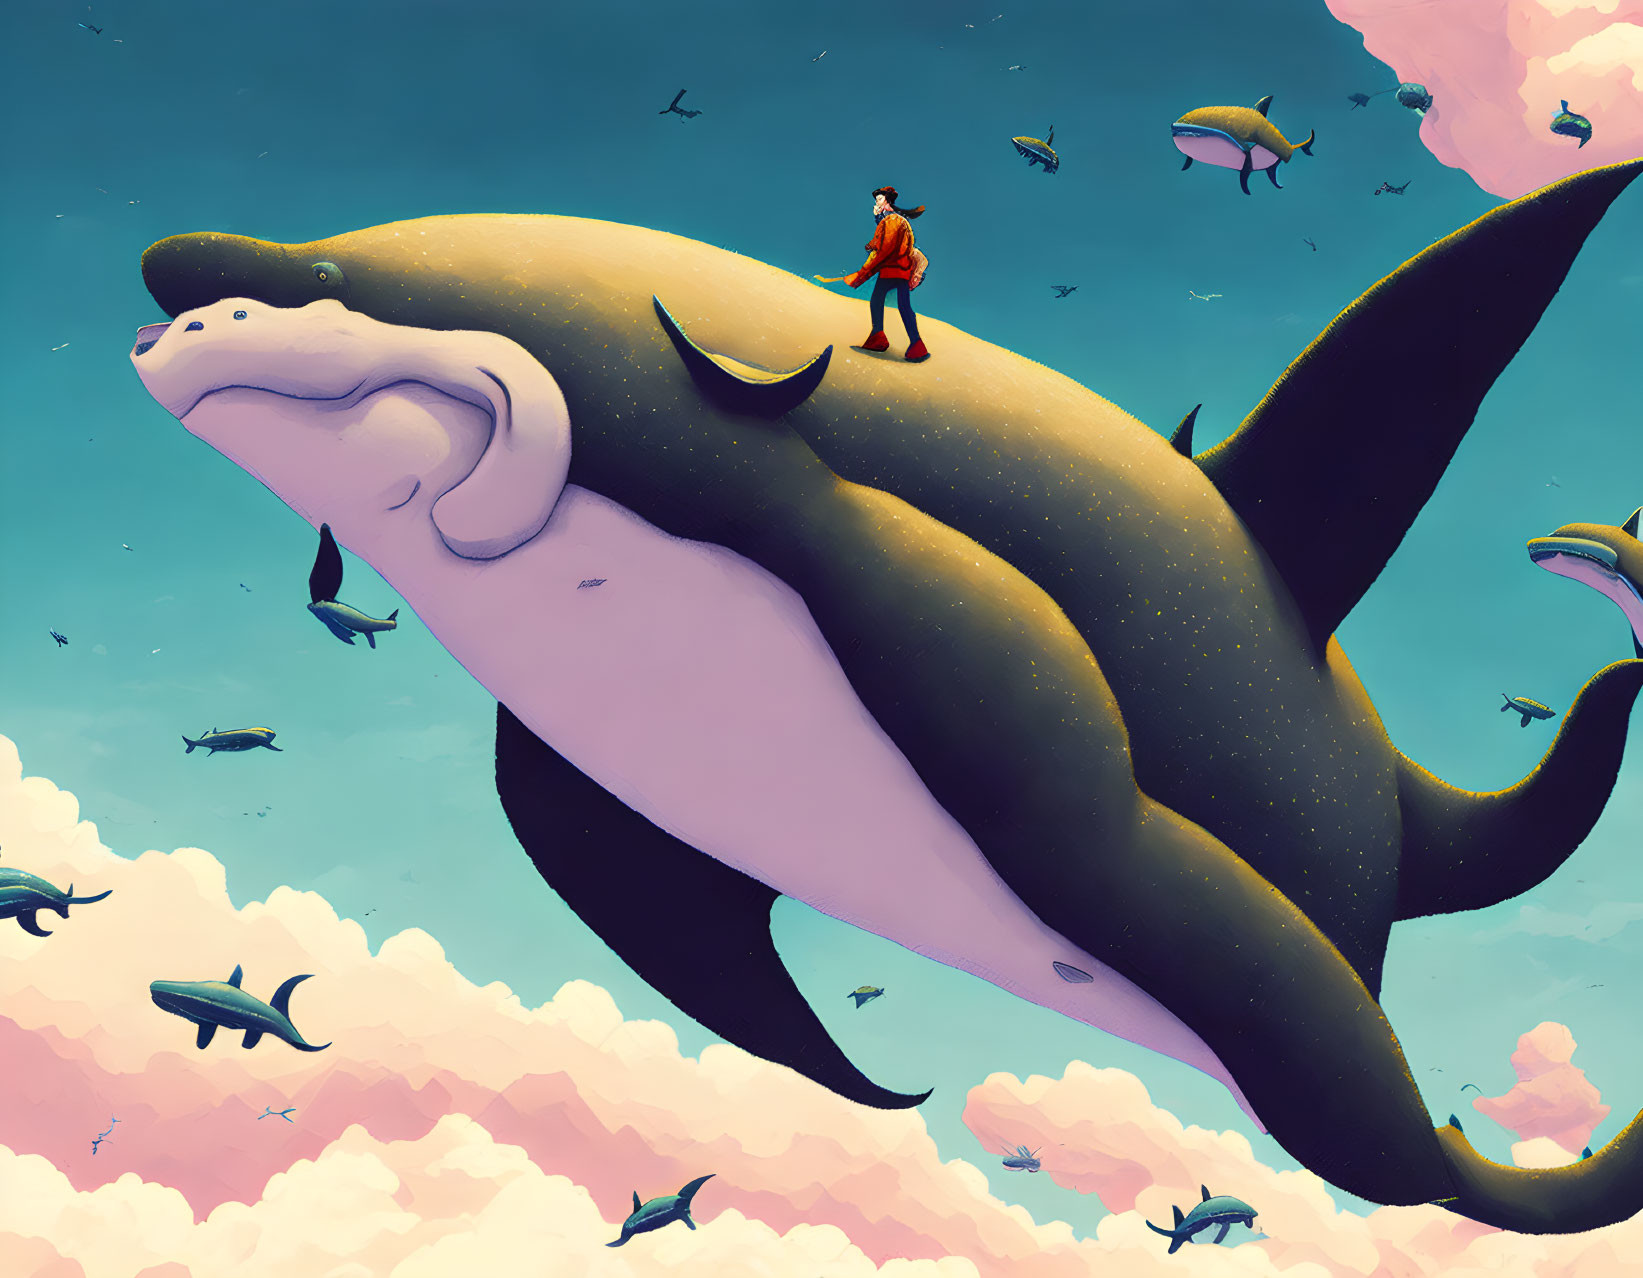 Person in Red Jacket Riding Smiling Whale in Pastel Sky